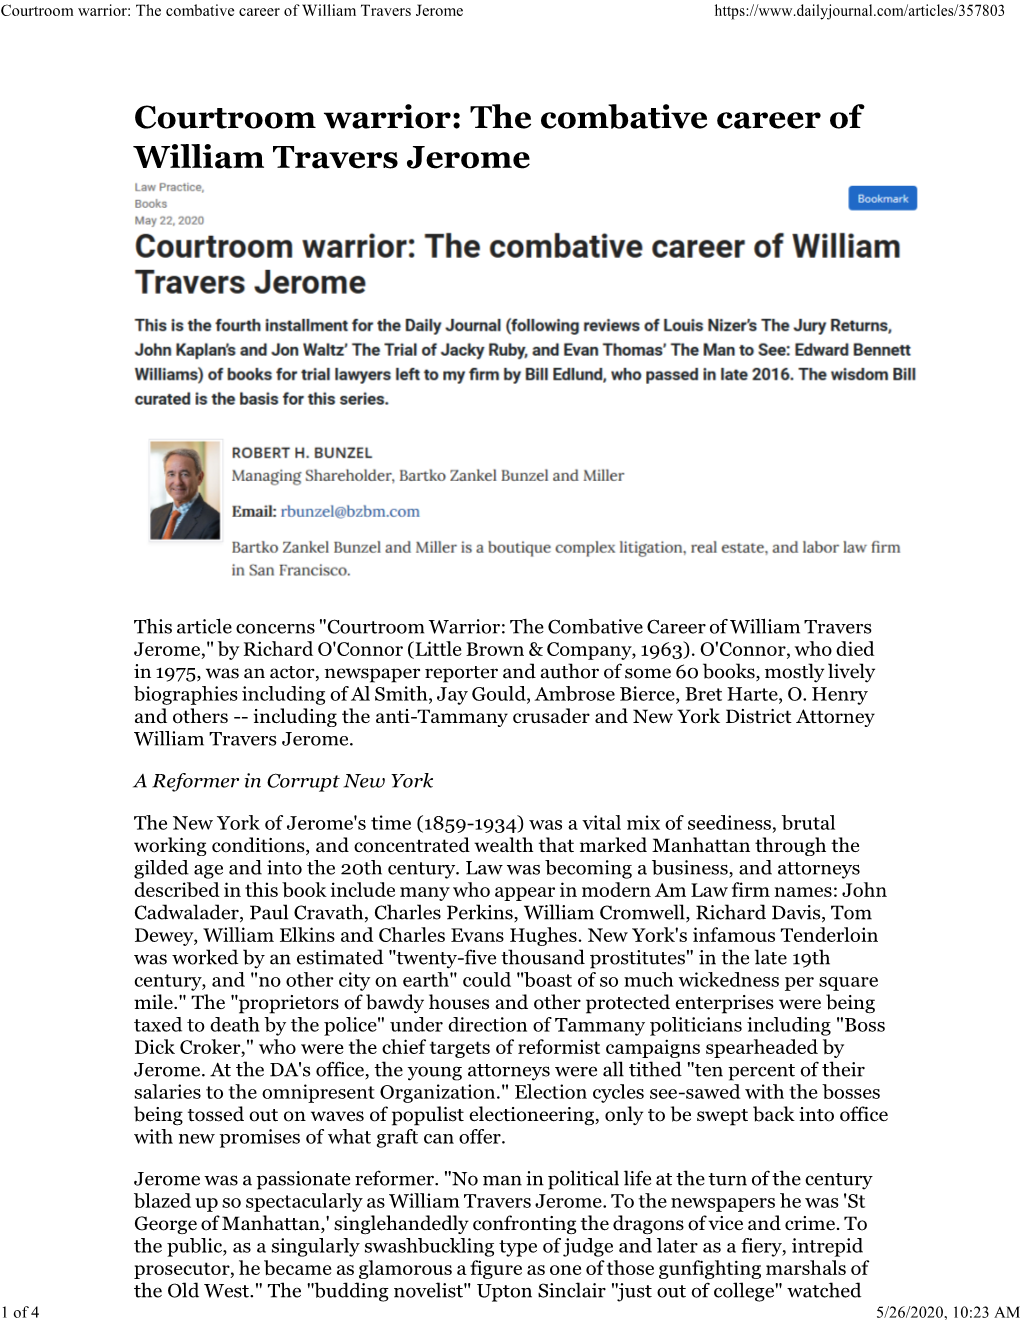 Courtroom Warrior: the Combative Career of William Travers Jerome